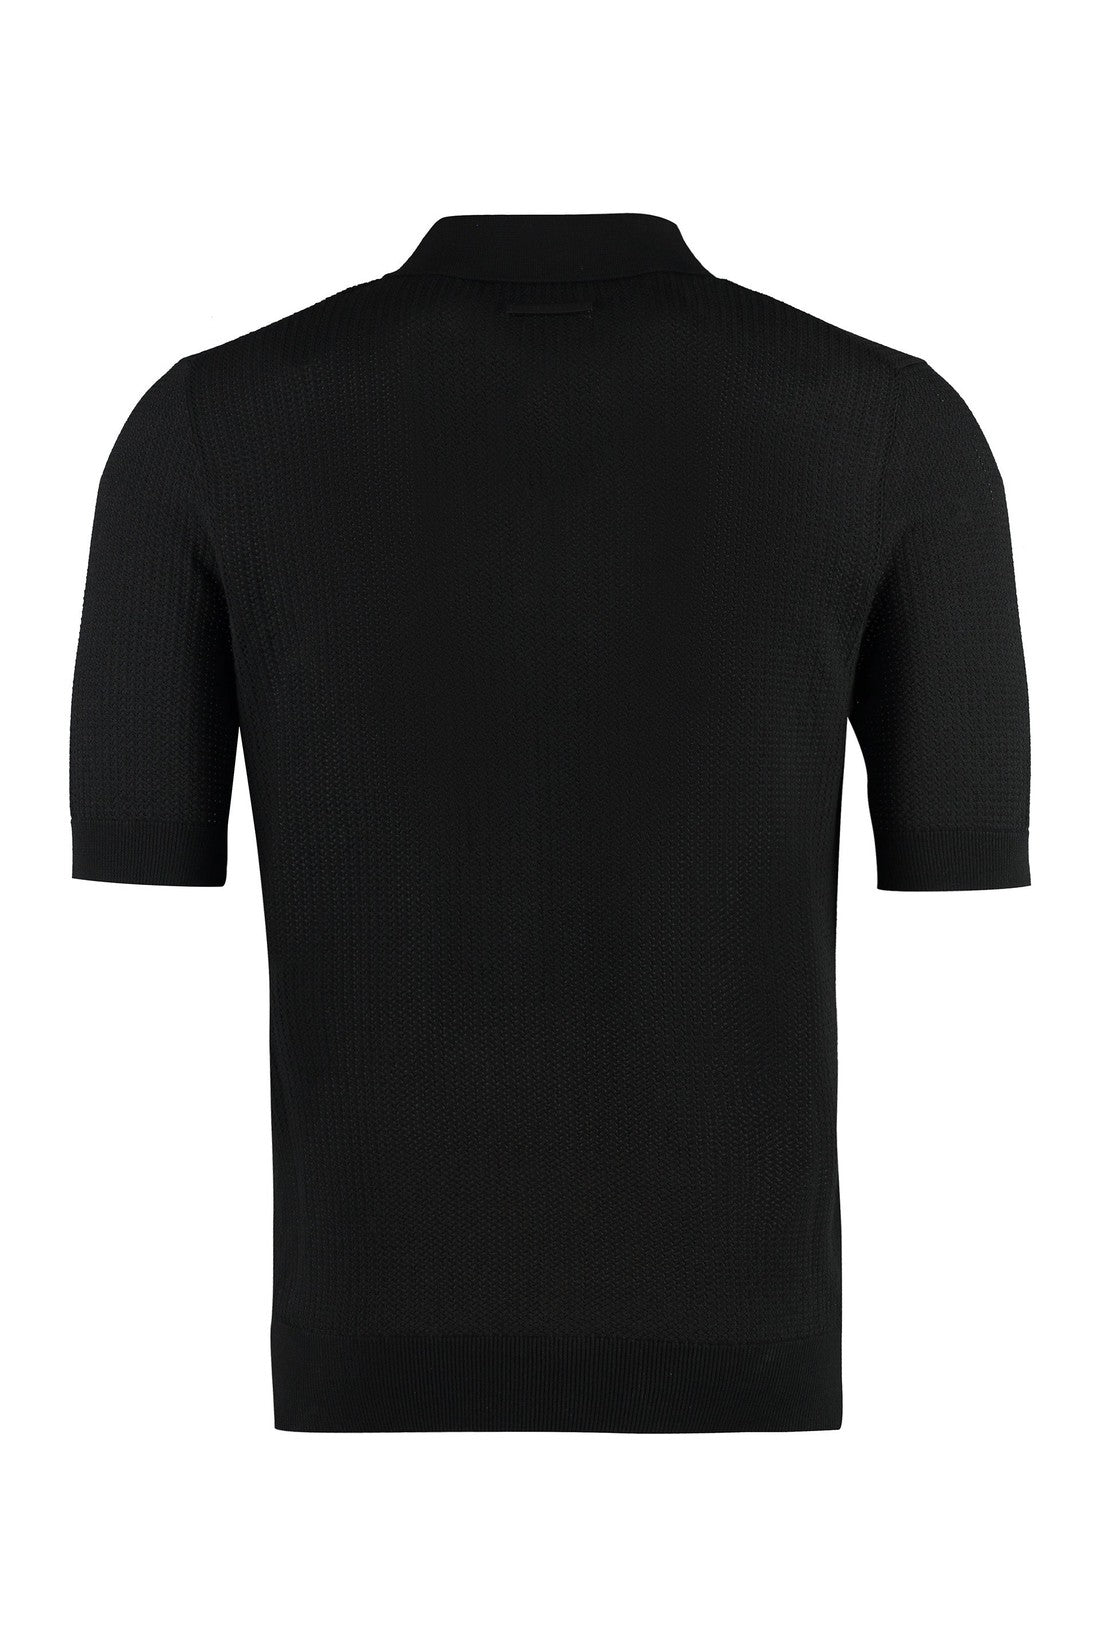 Dolce & Gabbana-OUTLET-SALE-Knitted cotton polo shirt-ARCHIVIST